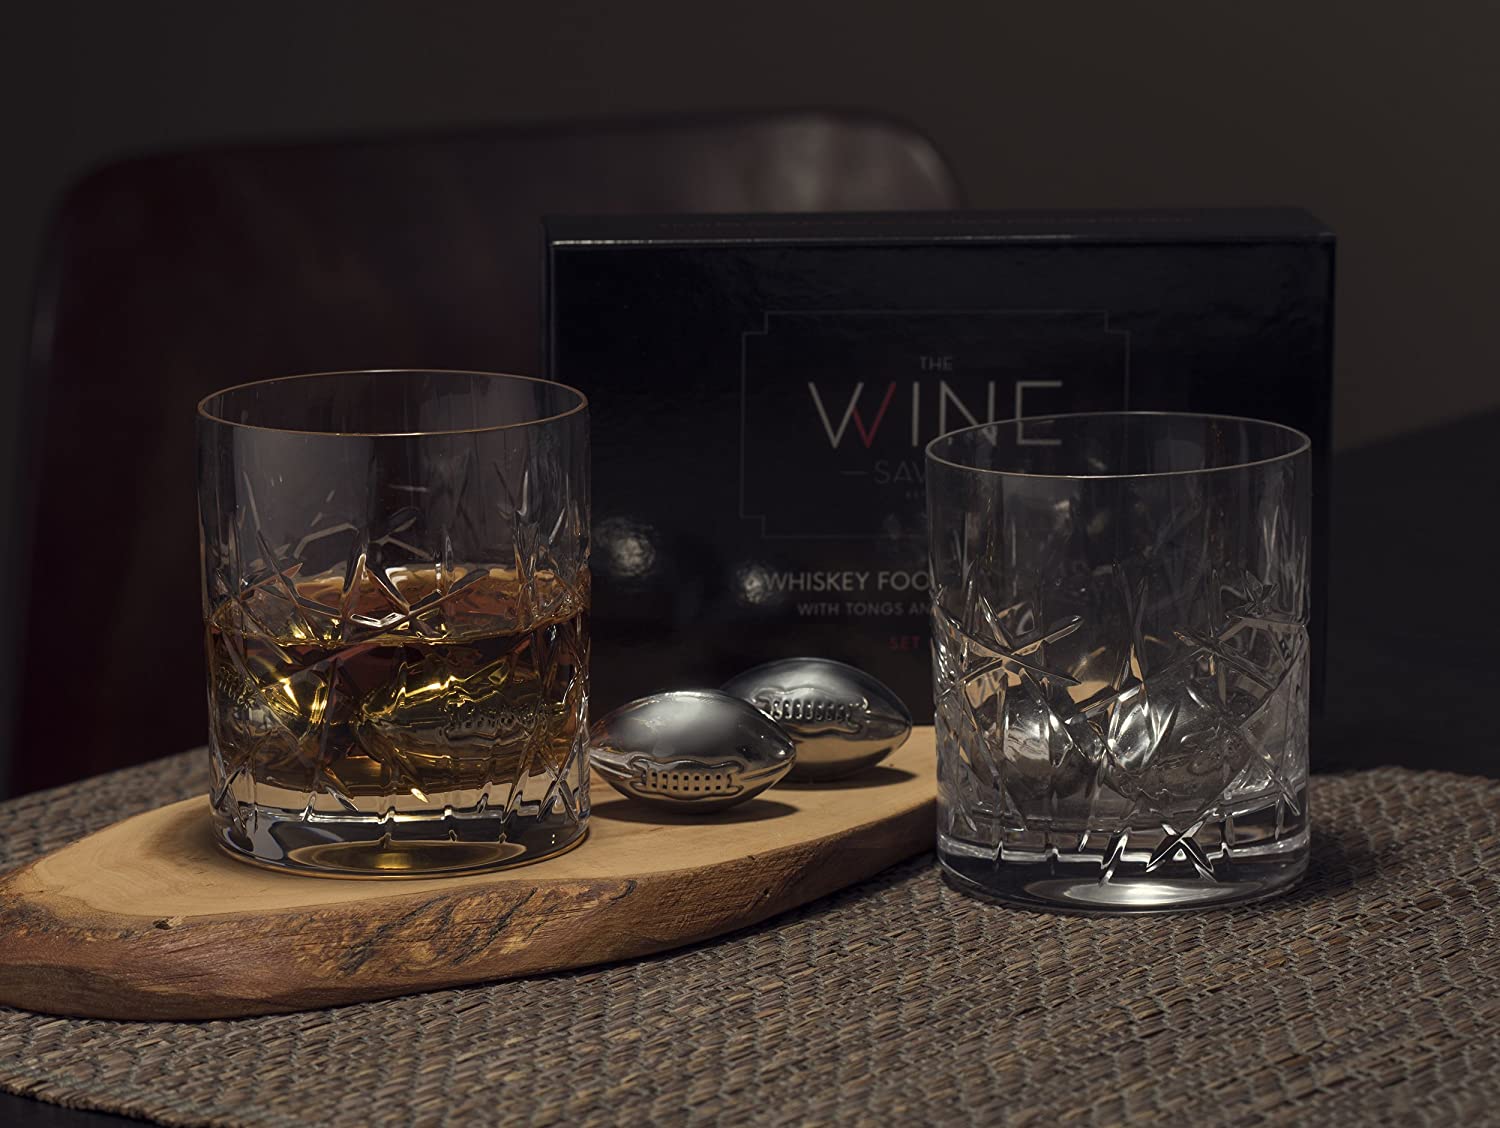 Whiskey Stones Gift Set for Men, by The Wine Savant, 6 Stainless Steel